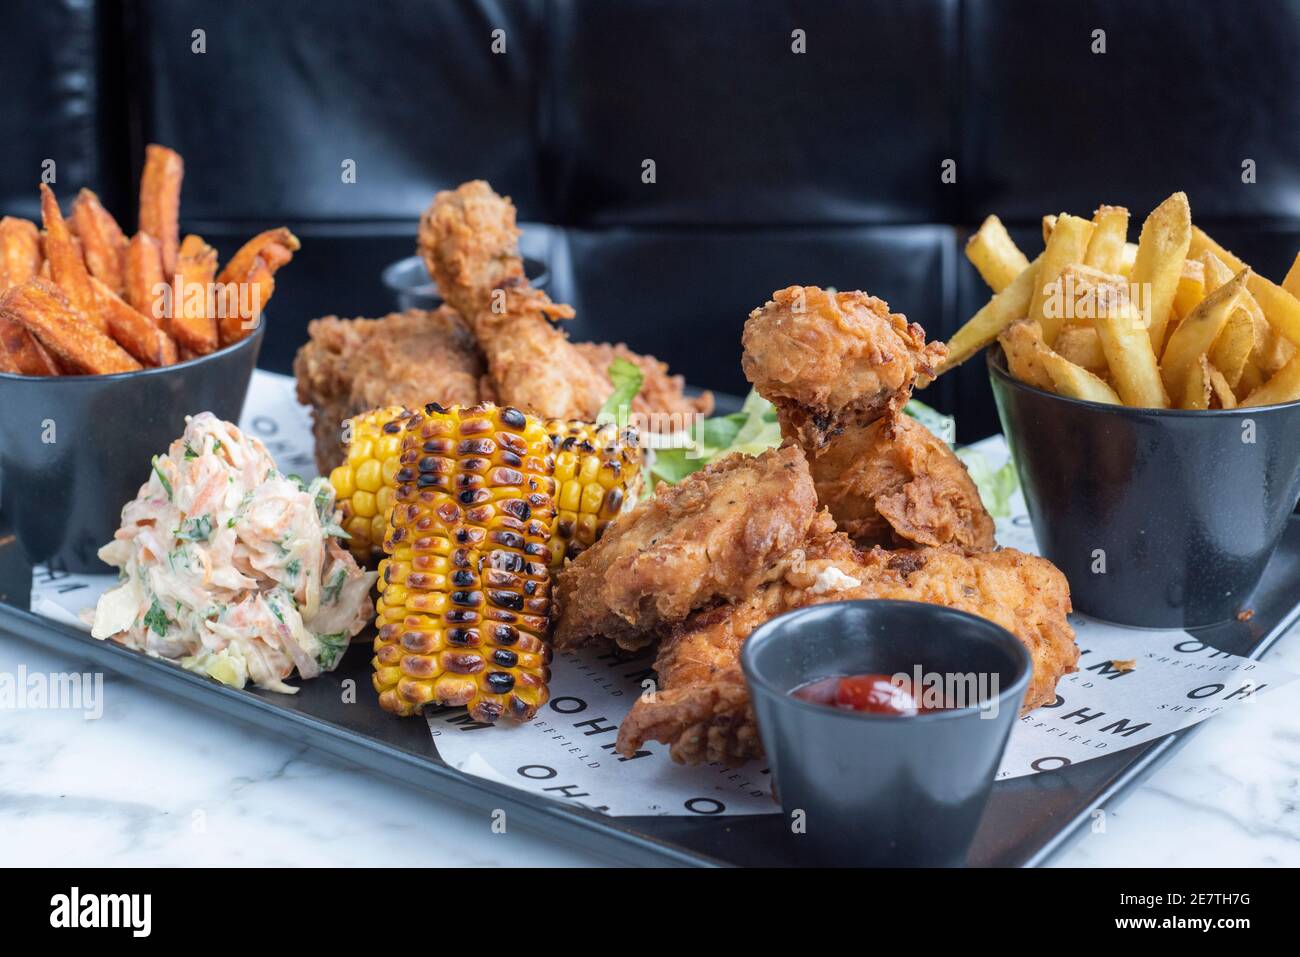 Sheffield, UK - 03 Aug 2017: Southern fried chicken and fries share platter with coleslaw and corn on the cob at OHM, Fitzwilliam Street Stock Photo